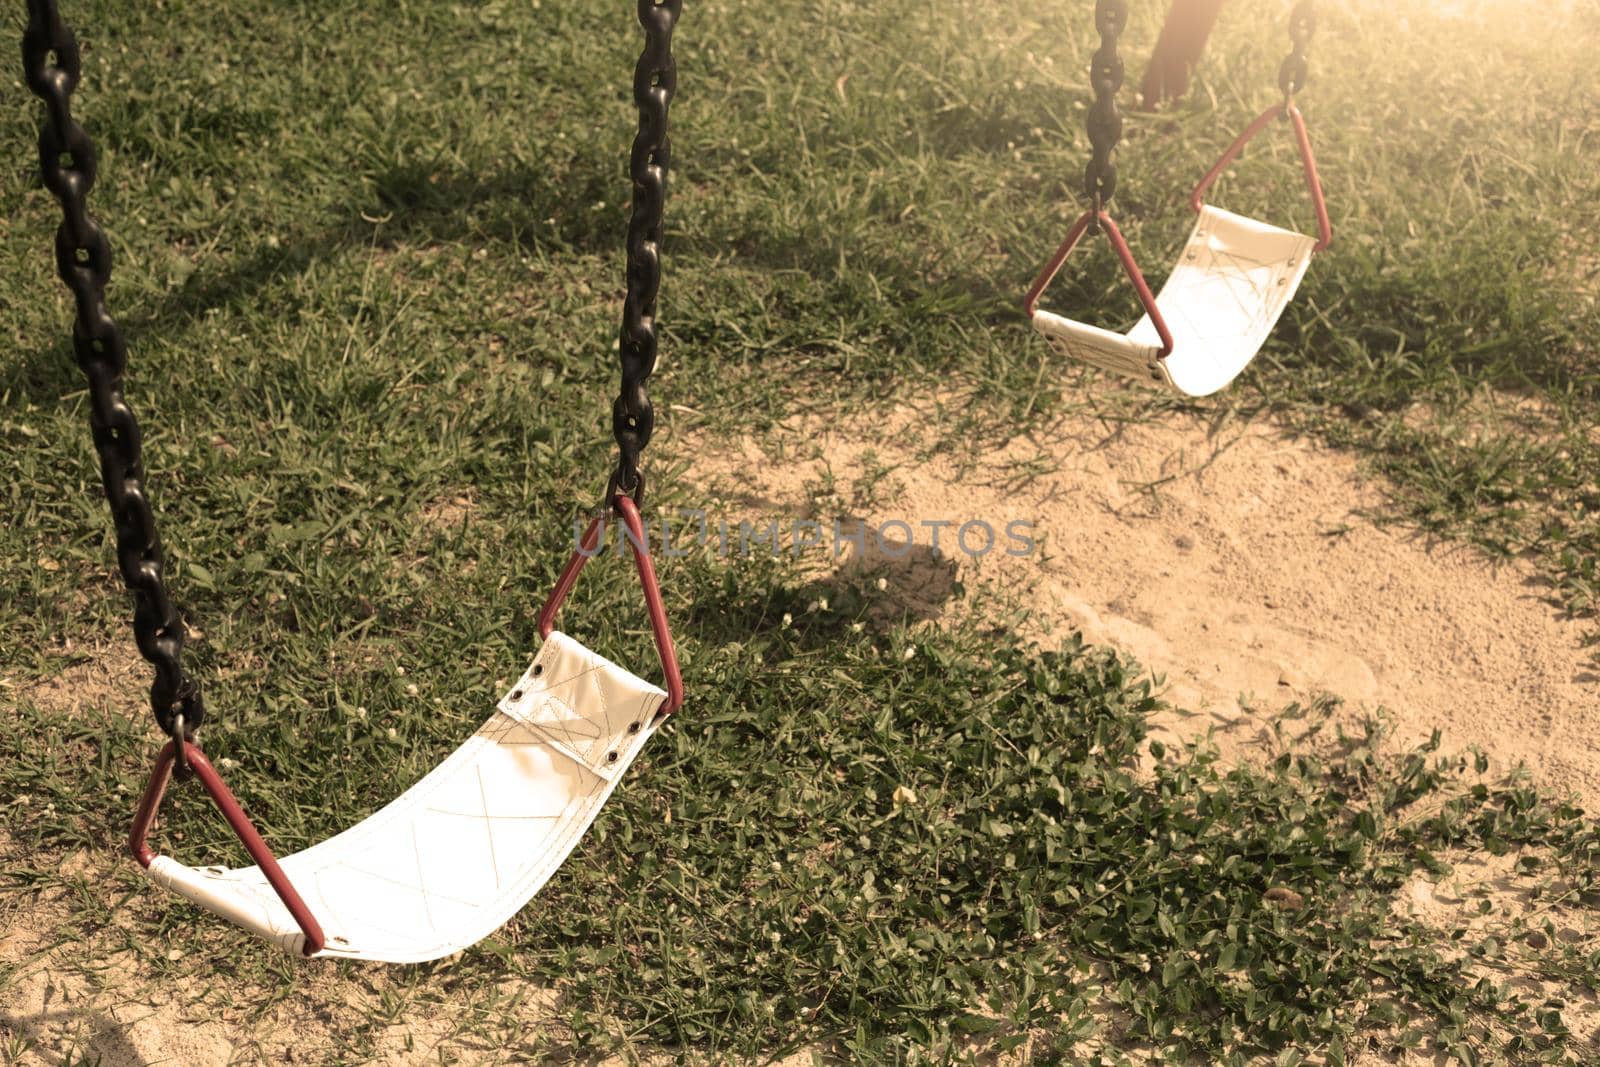 Playground swing lonely in the park and garden. by jayzynism